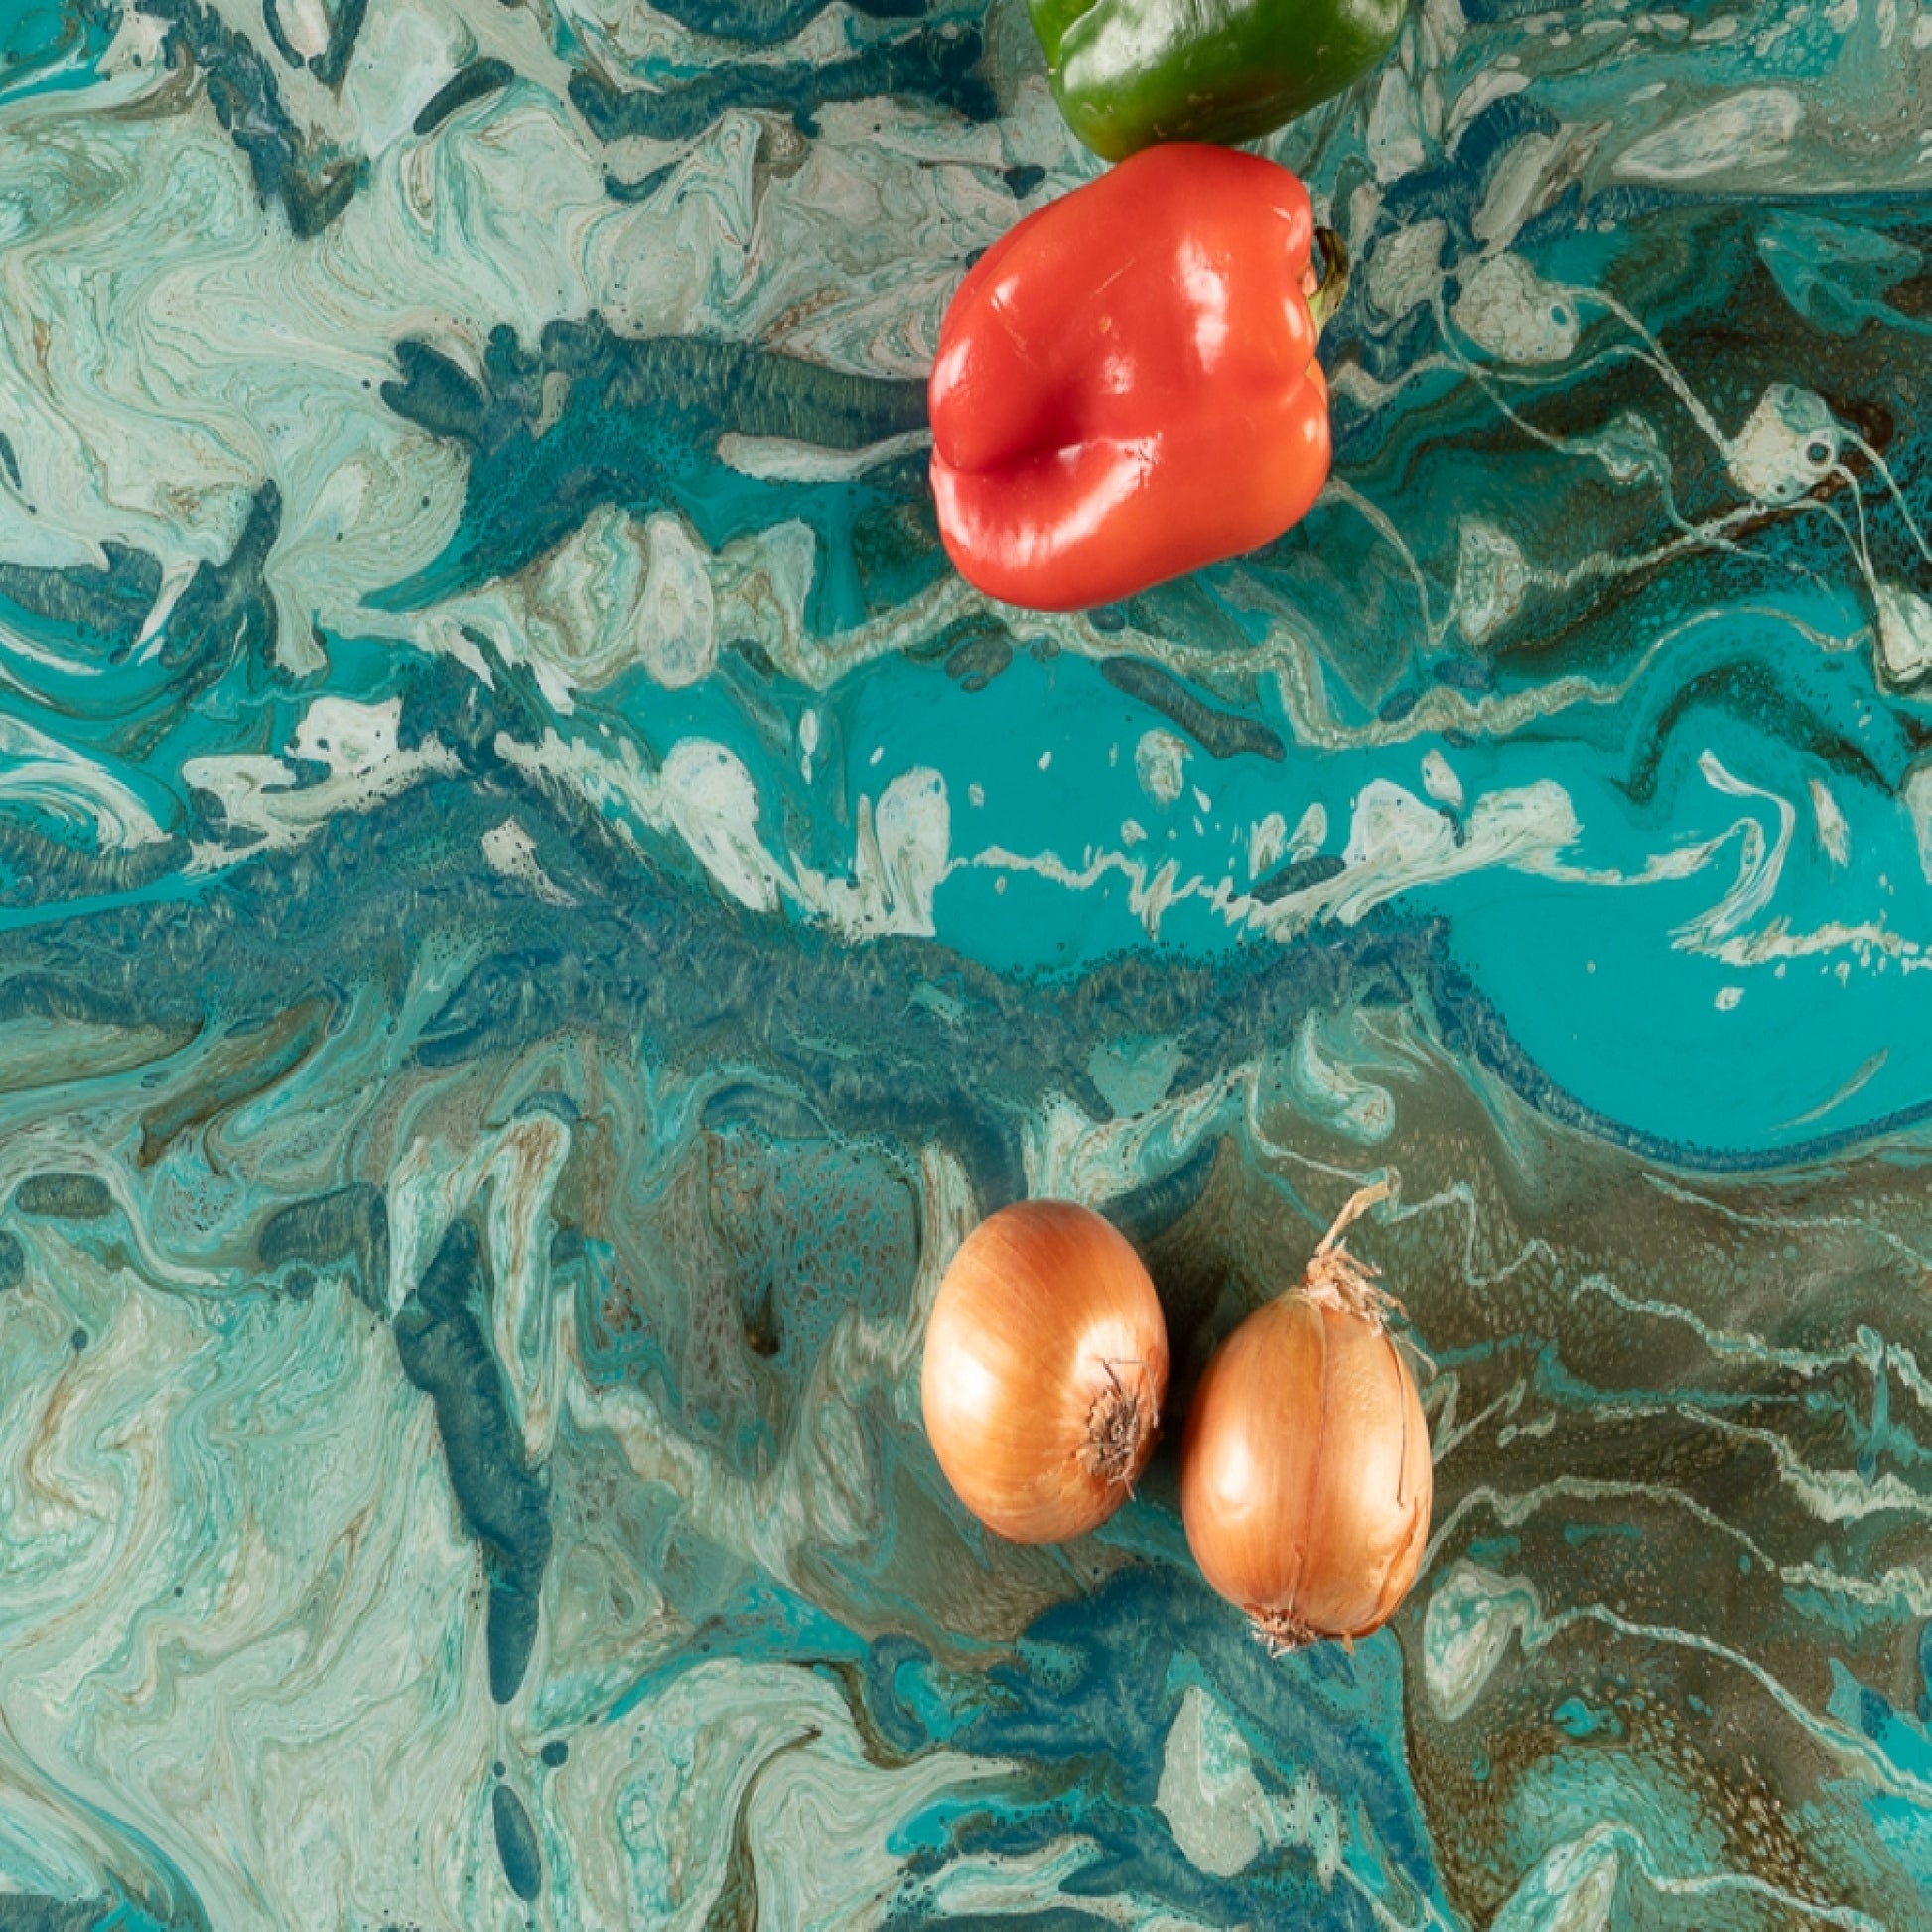 Artistic Kitchen: Bring art into your kitchen with the vibrant colors of Mojito